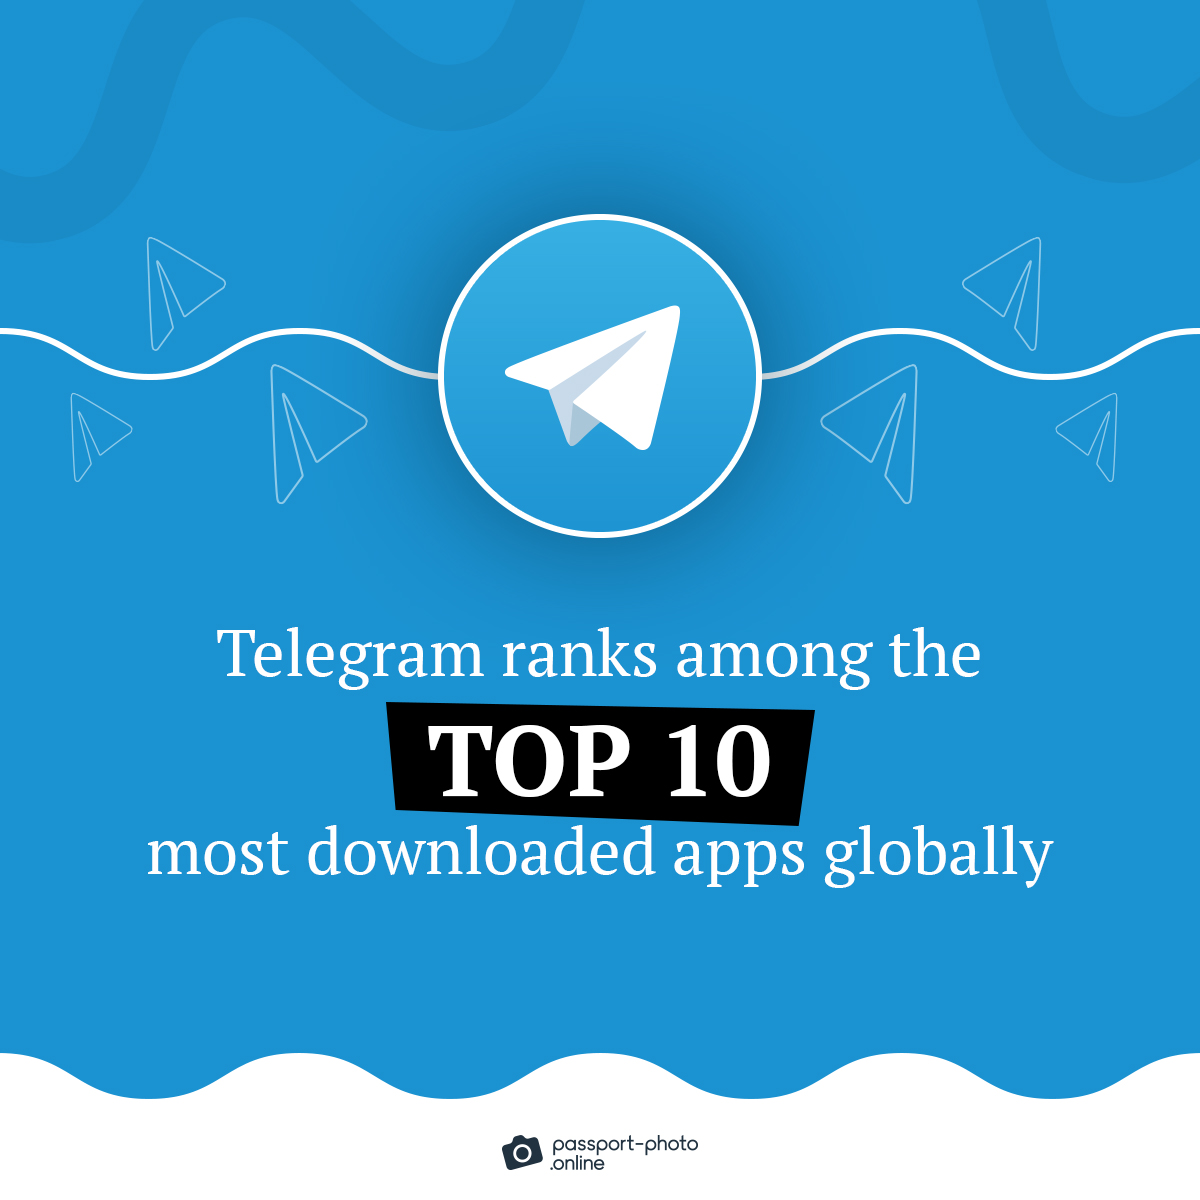 Telegram is among the most downloaded apps worldwide